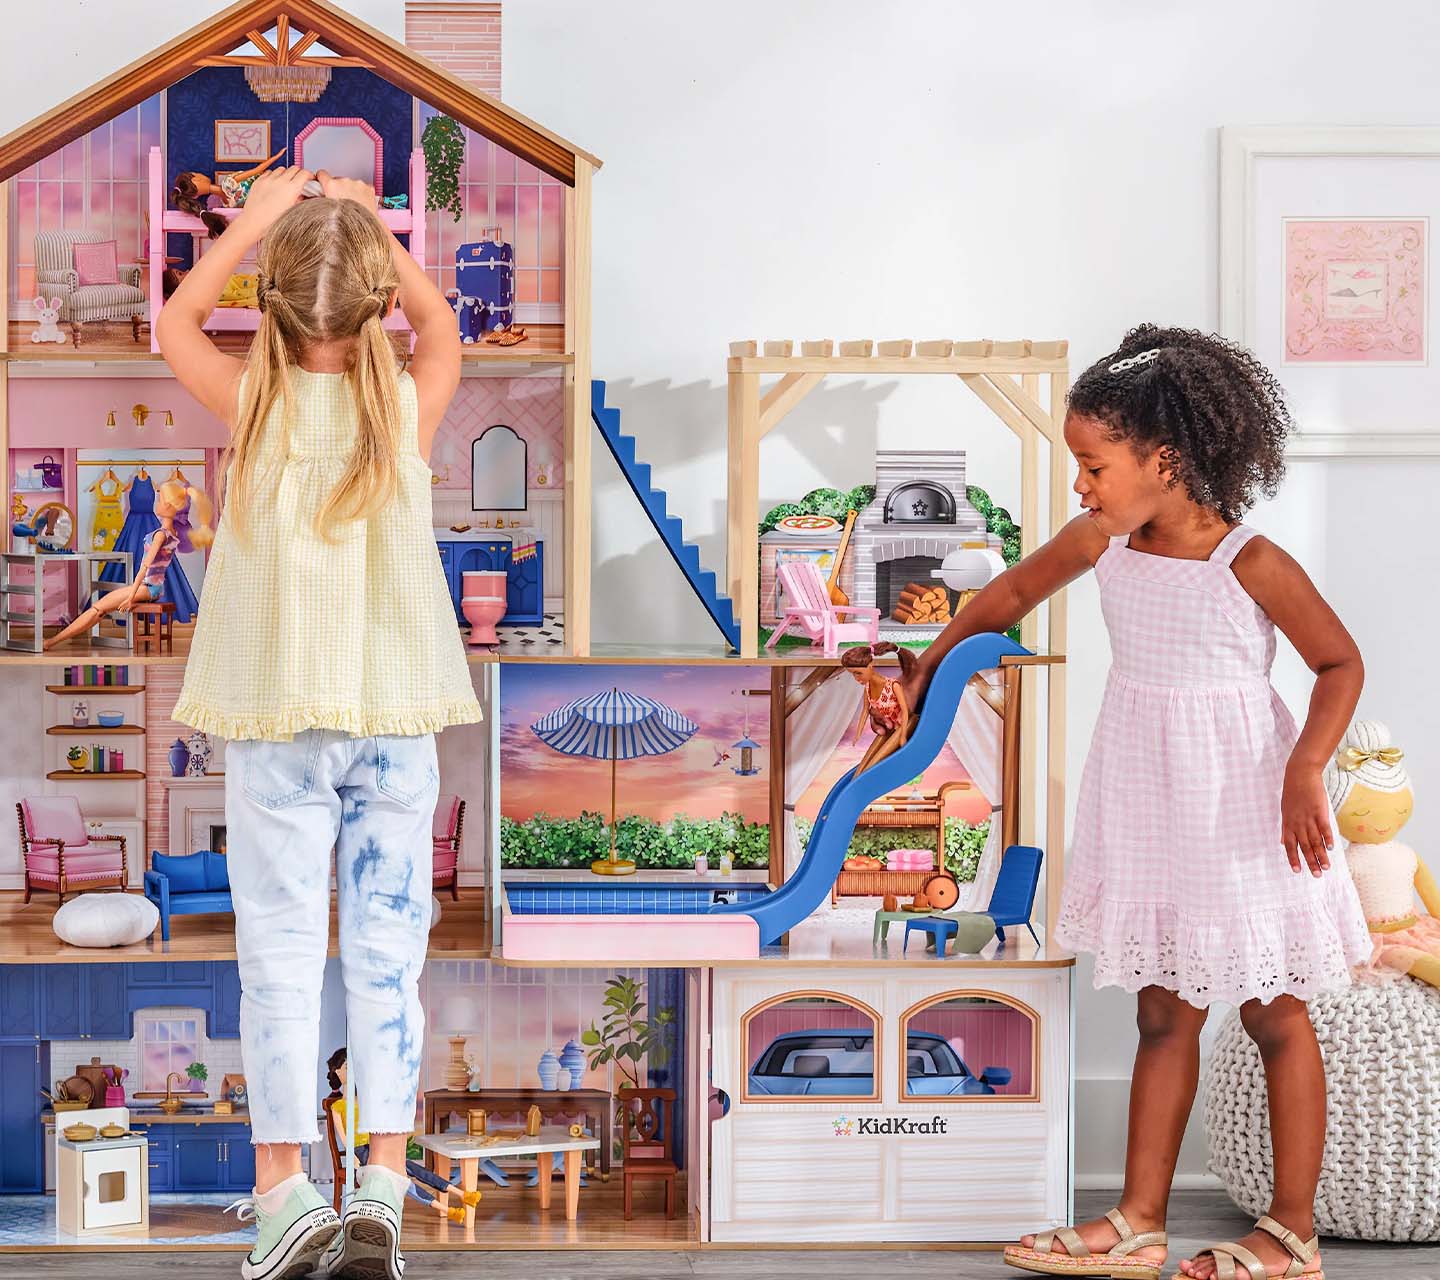 Children playing with KidKraft dollhouse